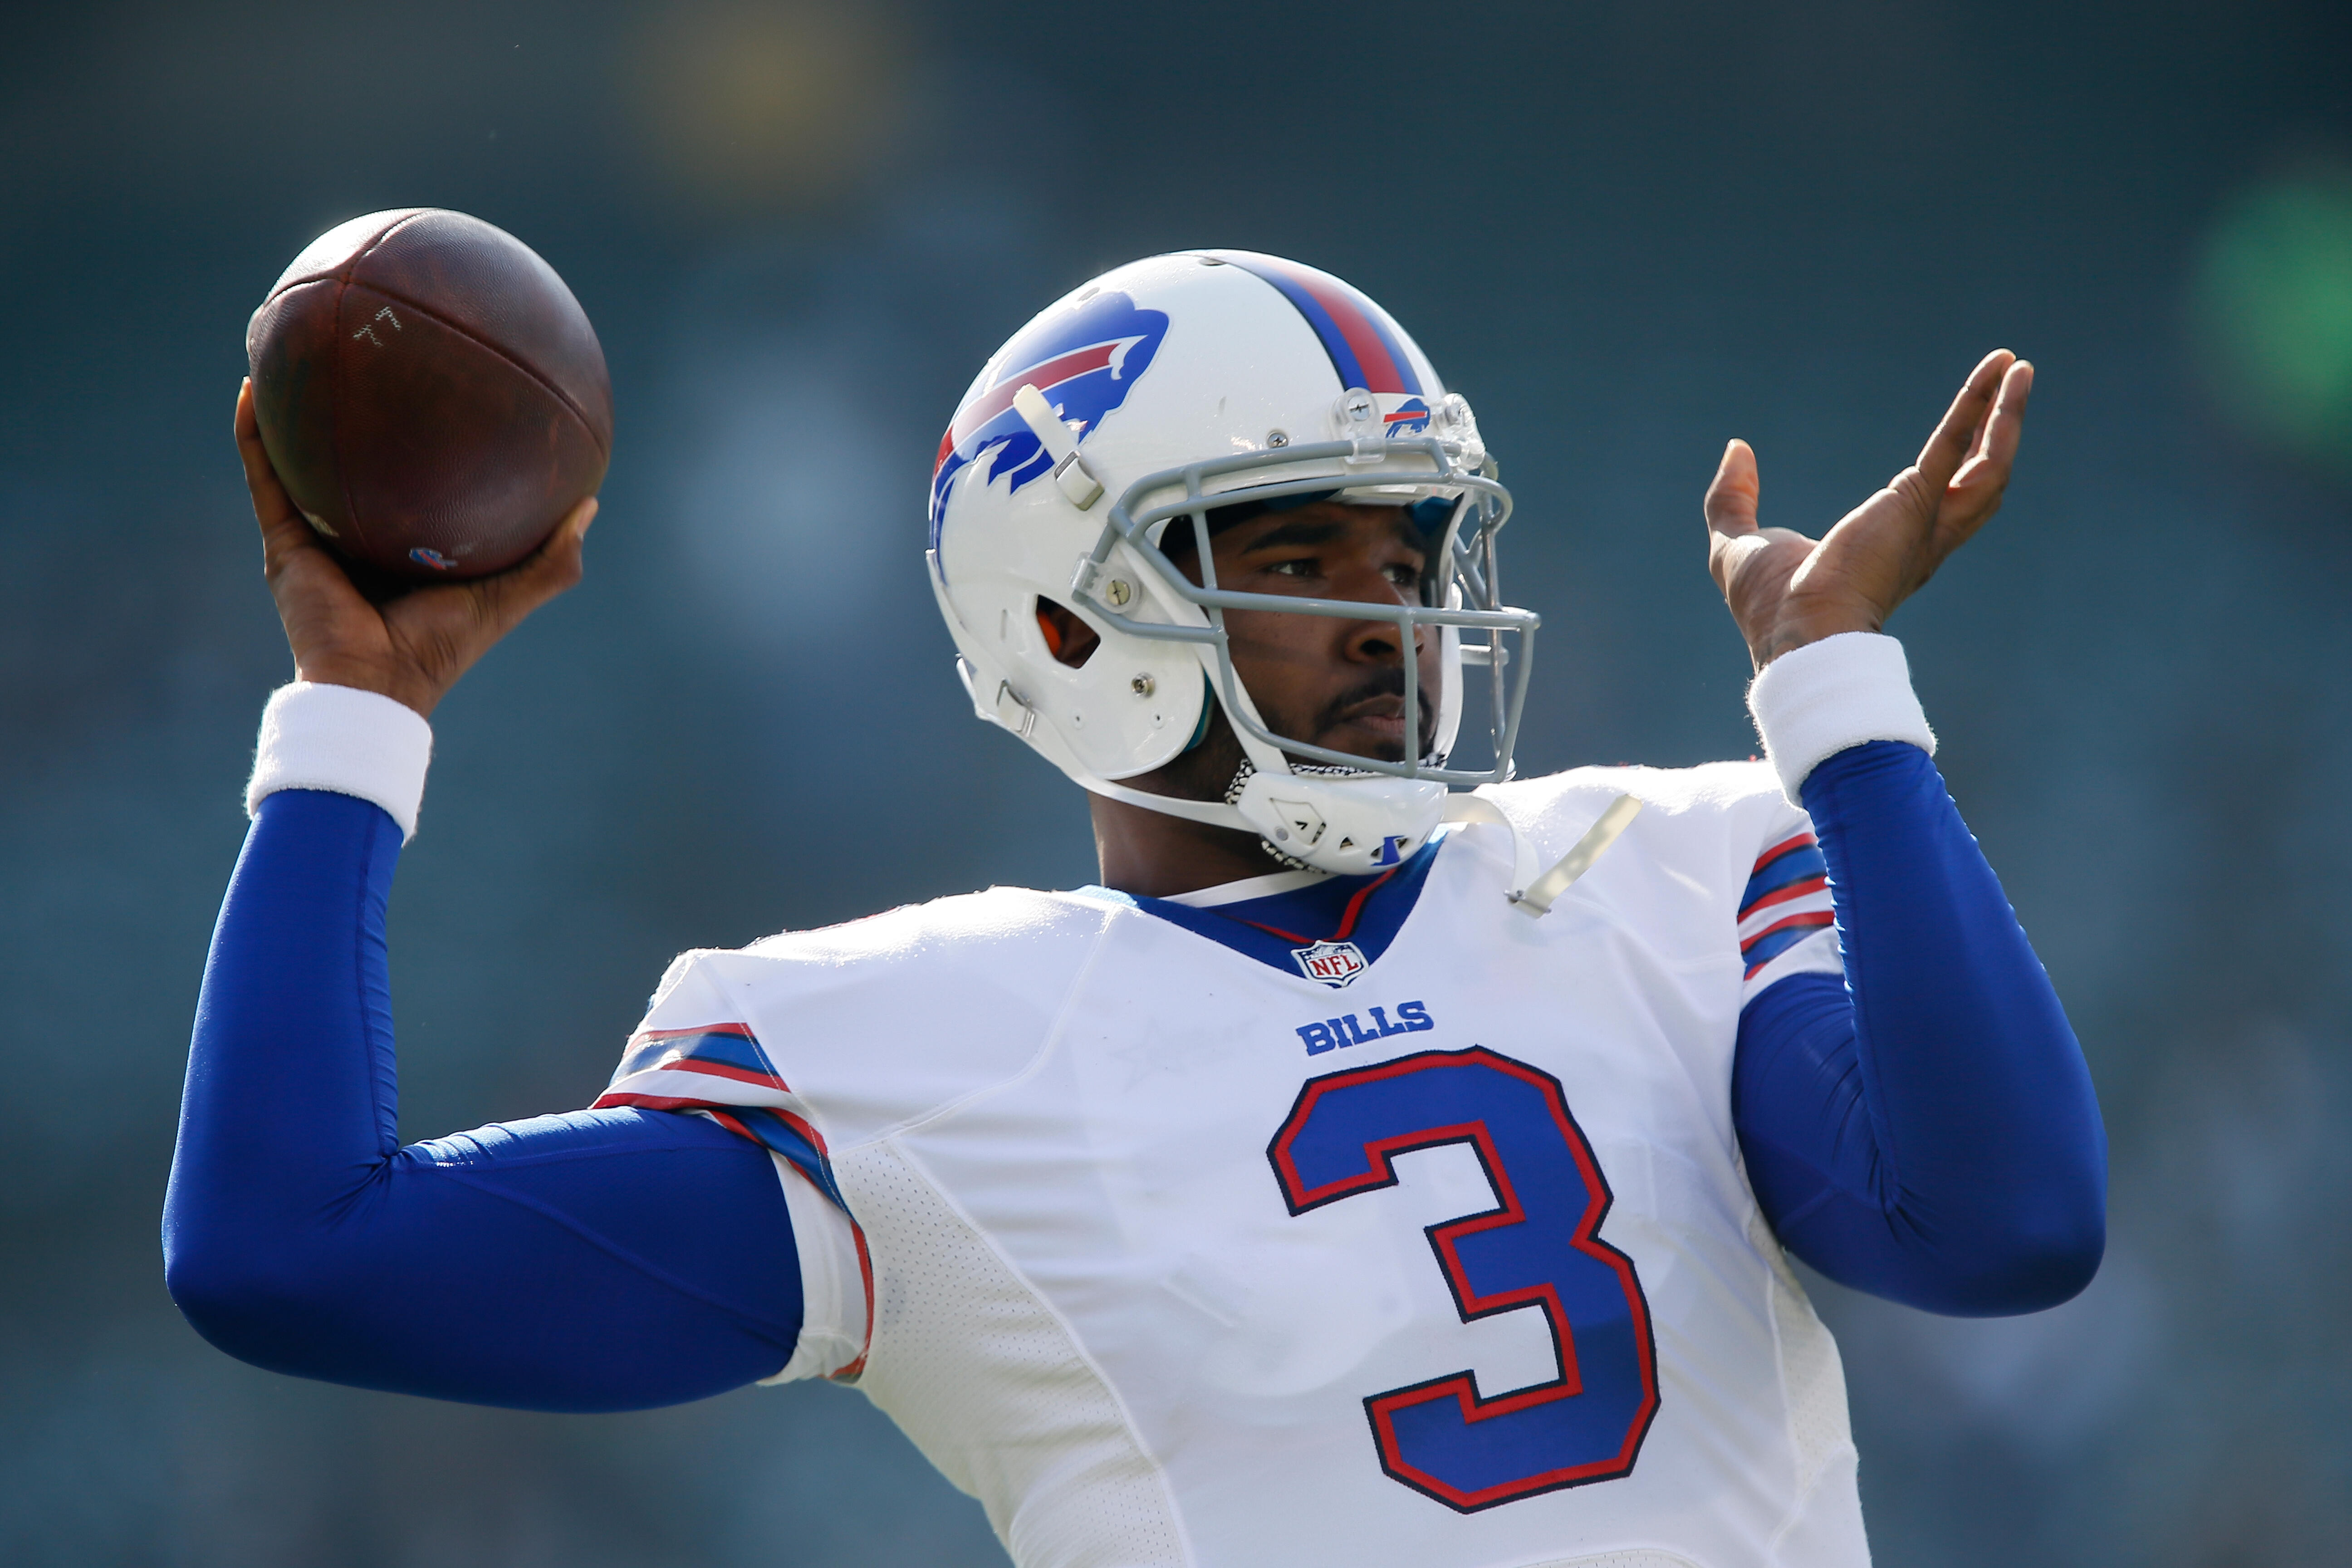 OAKLAND, CA - DECEMBER 04:  EJ Manuel #3 of the Buffalo Bills warms up prior to playing the Oakland Raiders in their NFL game at Oakland Alameda Coliseum on December 4, 2016 in Oakland, California.  (Photo by Brian Bahr/Getty Images)